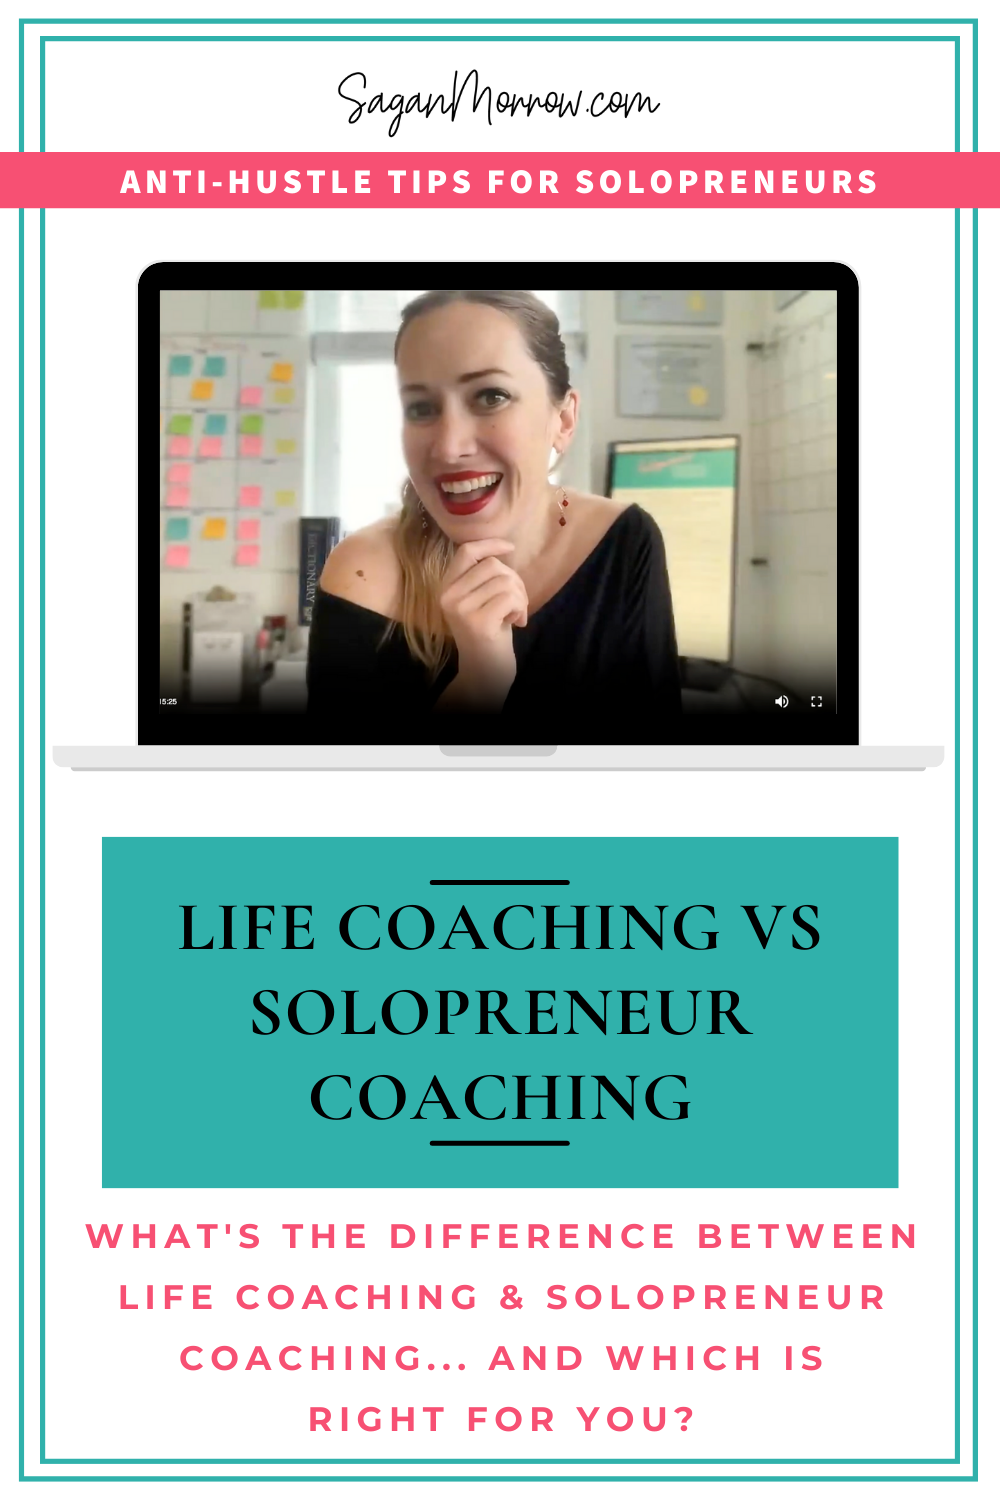 Solopreneur coaching vs life coaching — what's the difference, and which is right for YOU